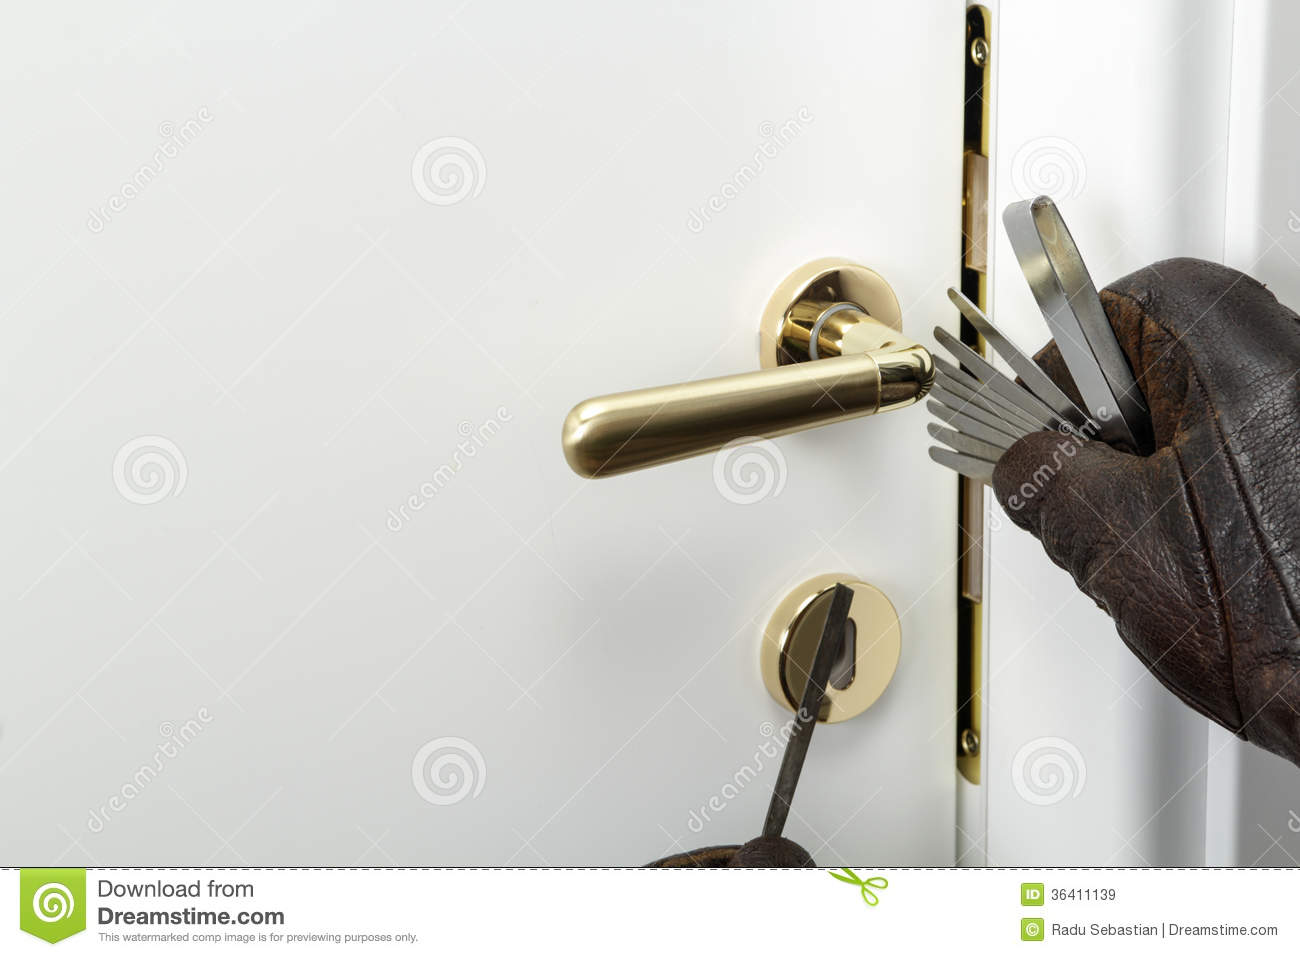 Breaking And Entering Home Royalty Free Stock Images   Image  36411139